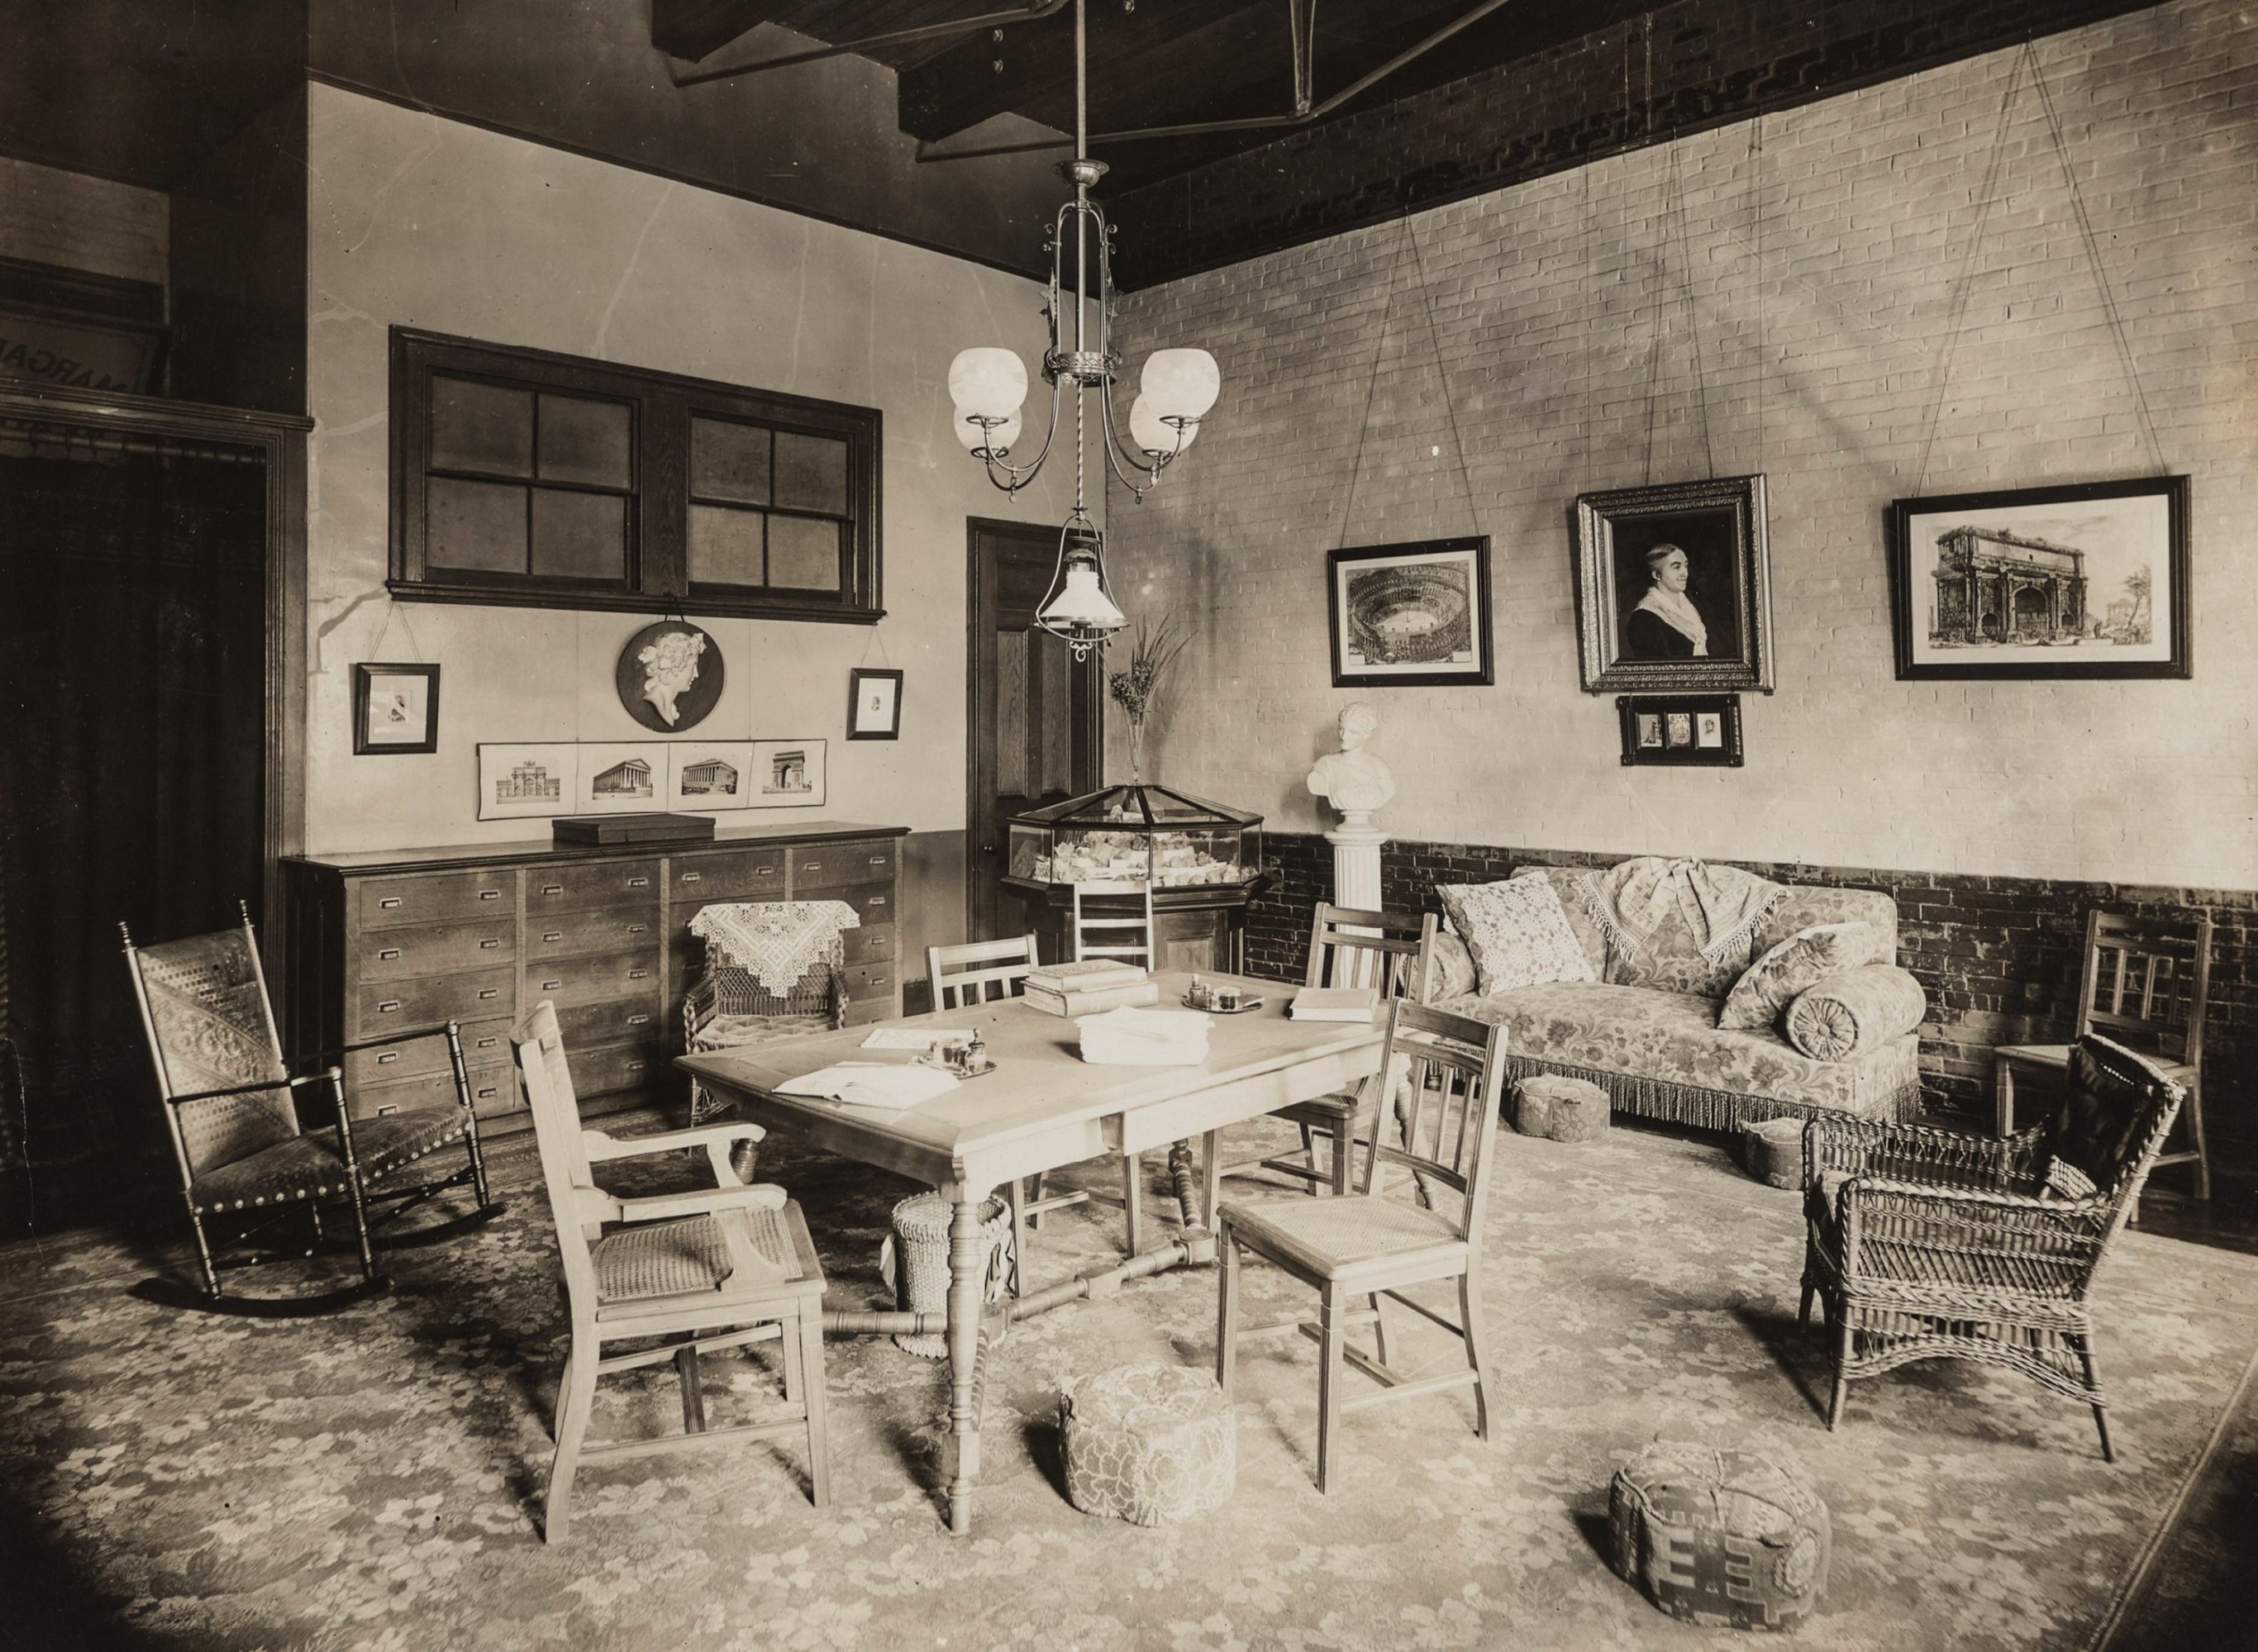 the original Cheney Room from the 1880s